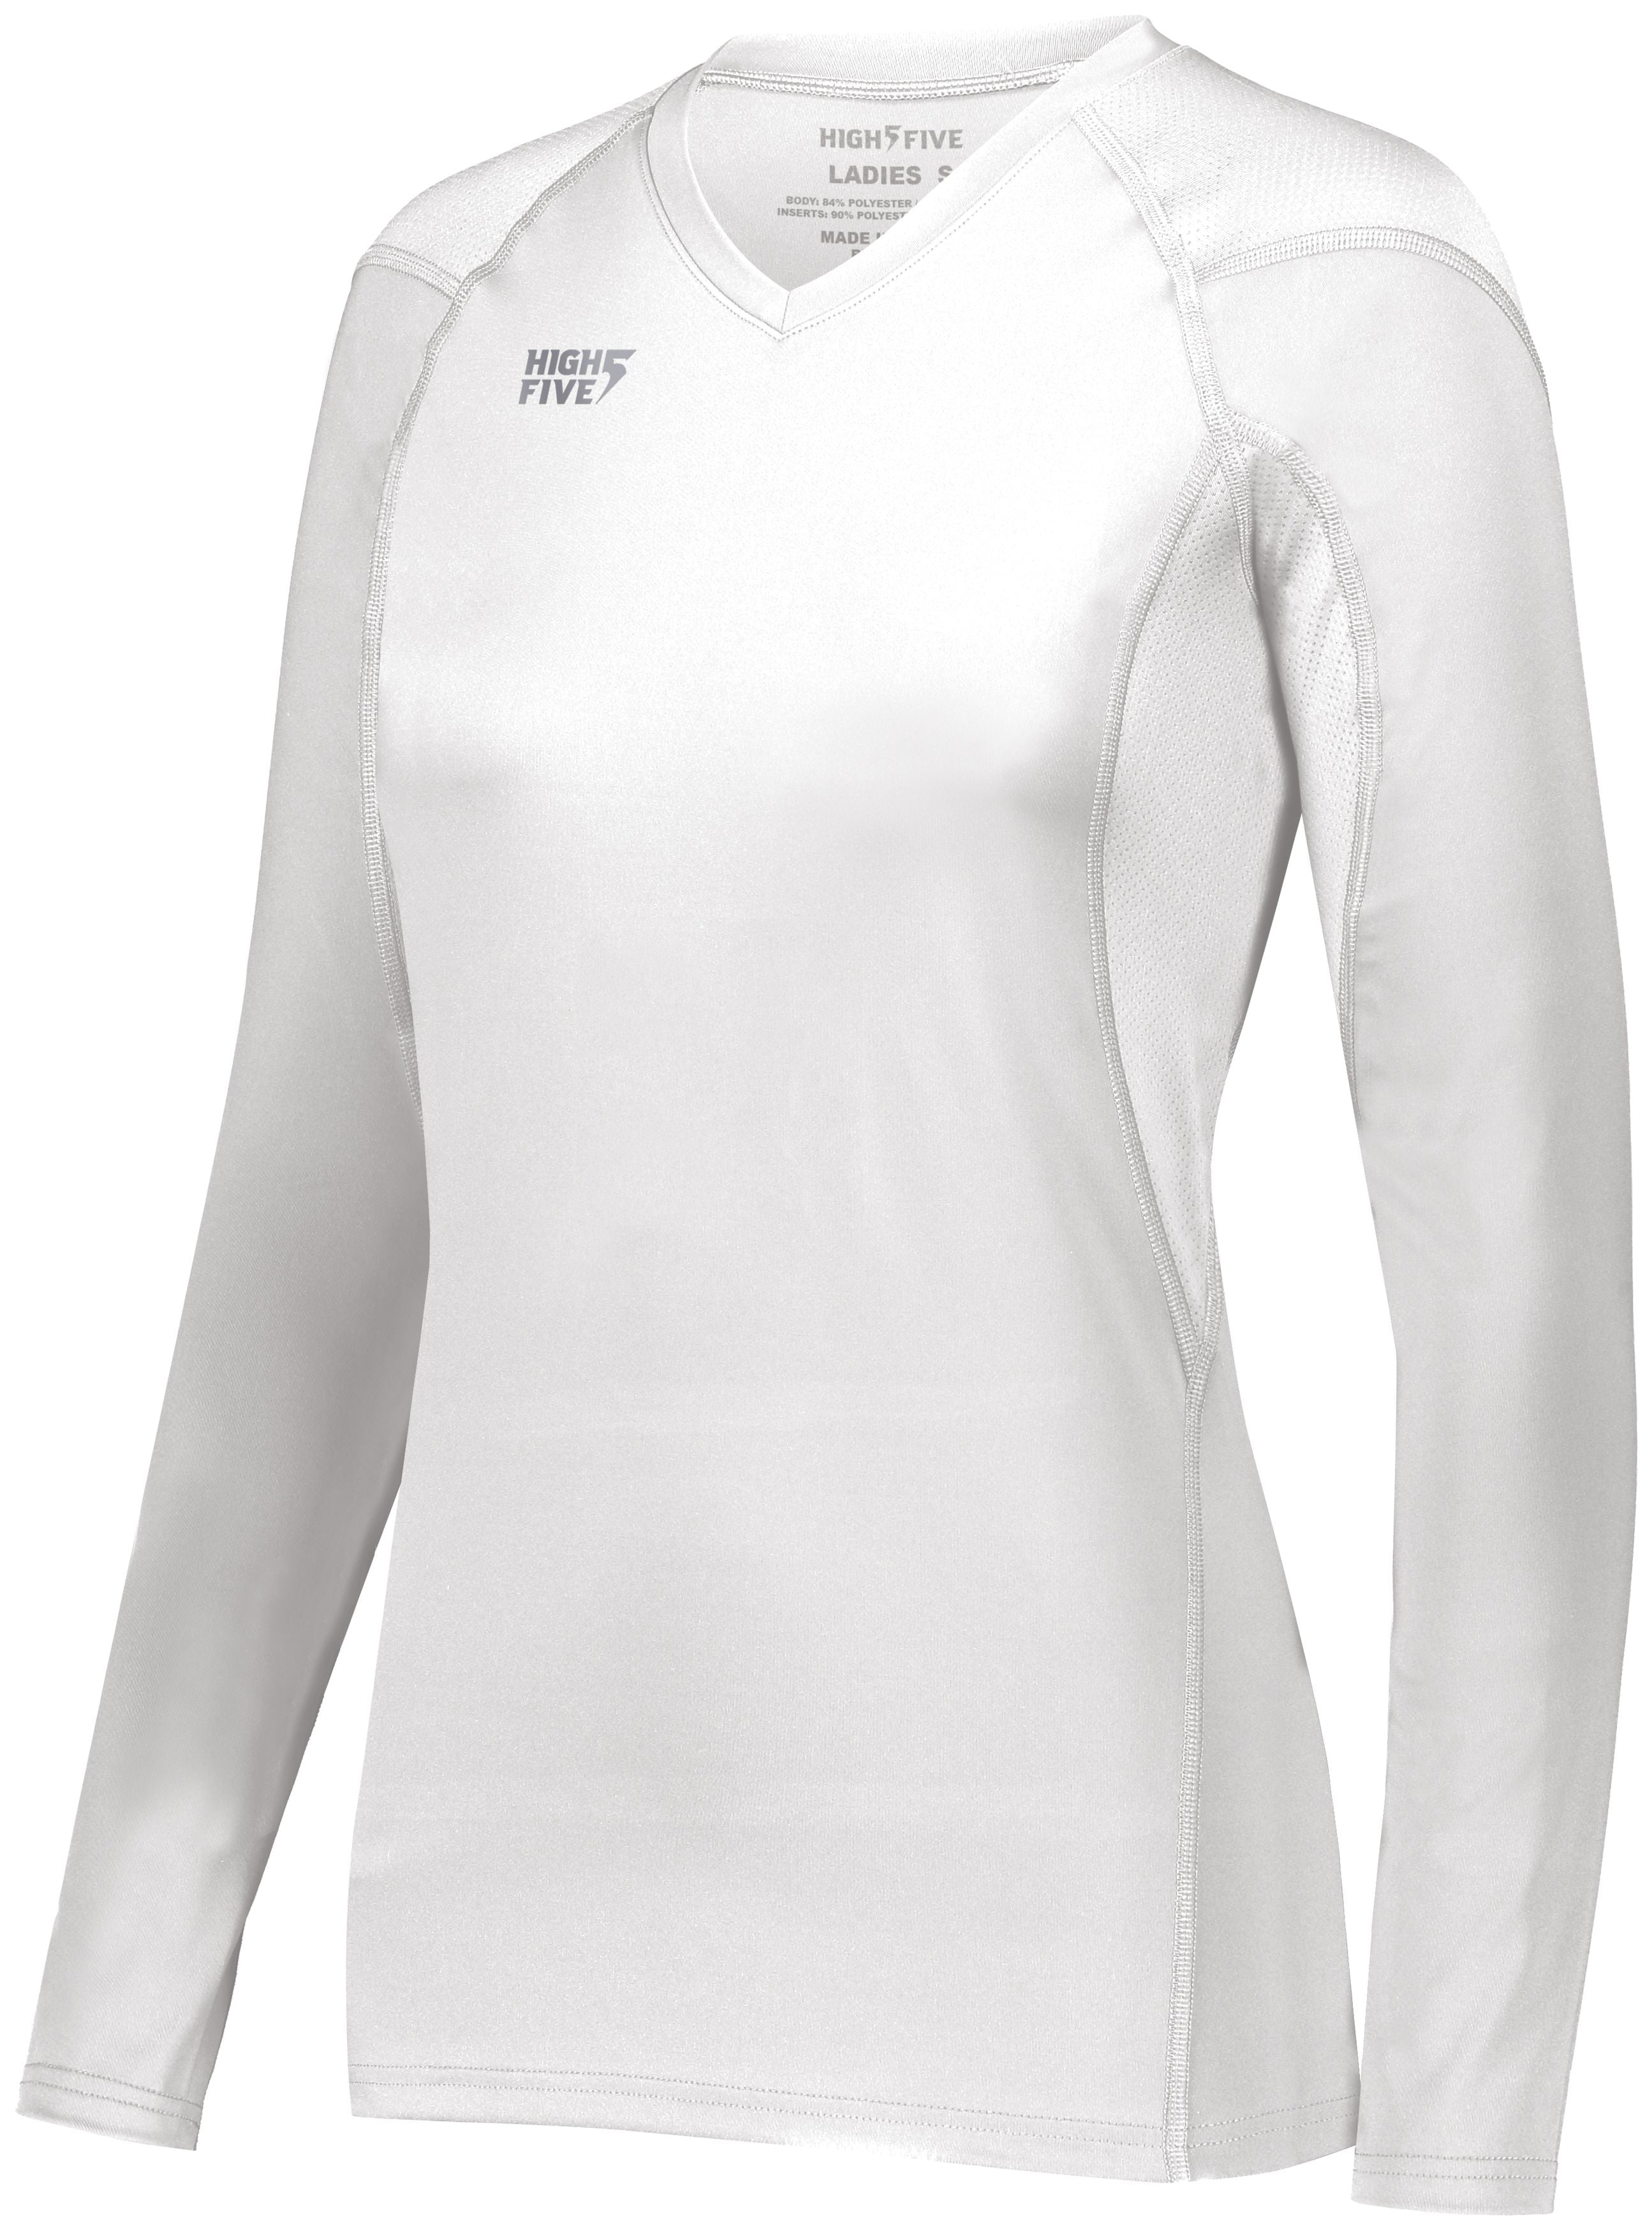 High 5 Ladies Truhit Long Sleeve Jersey in White  -Part of the Ladies, Ladies-Jersey, High5-Products, Volleyball, Shirts product lines at KanaleyCreations.com